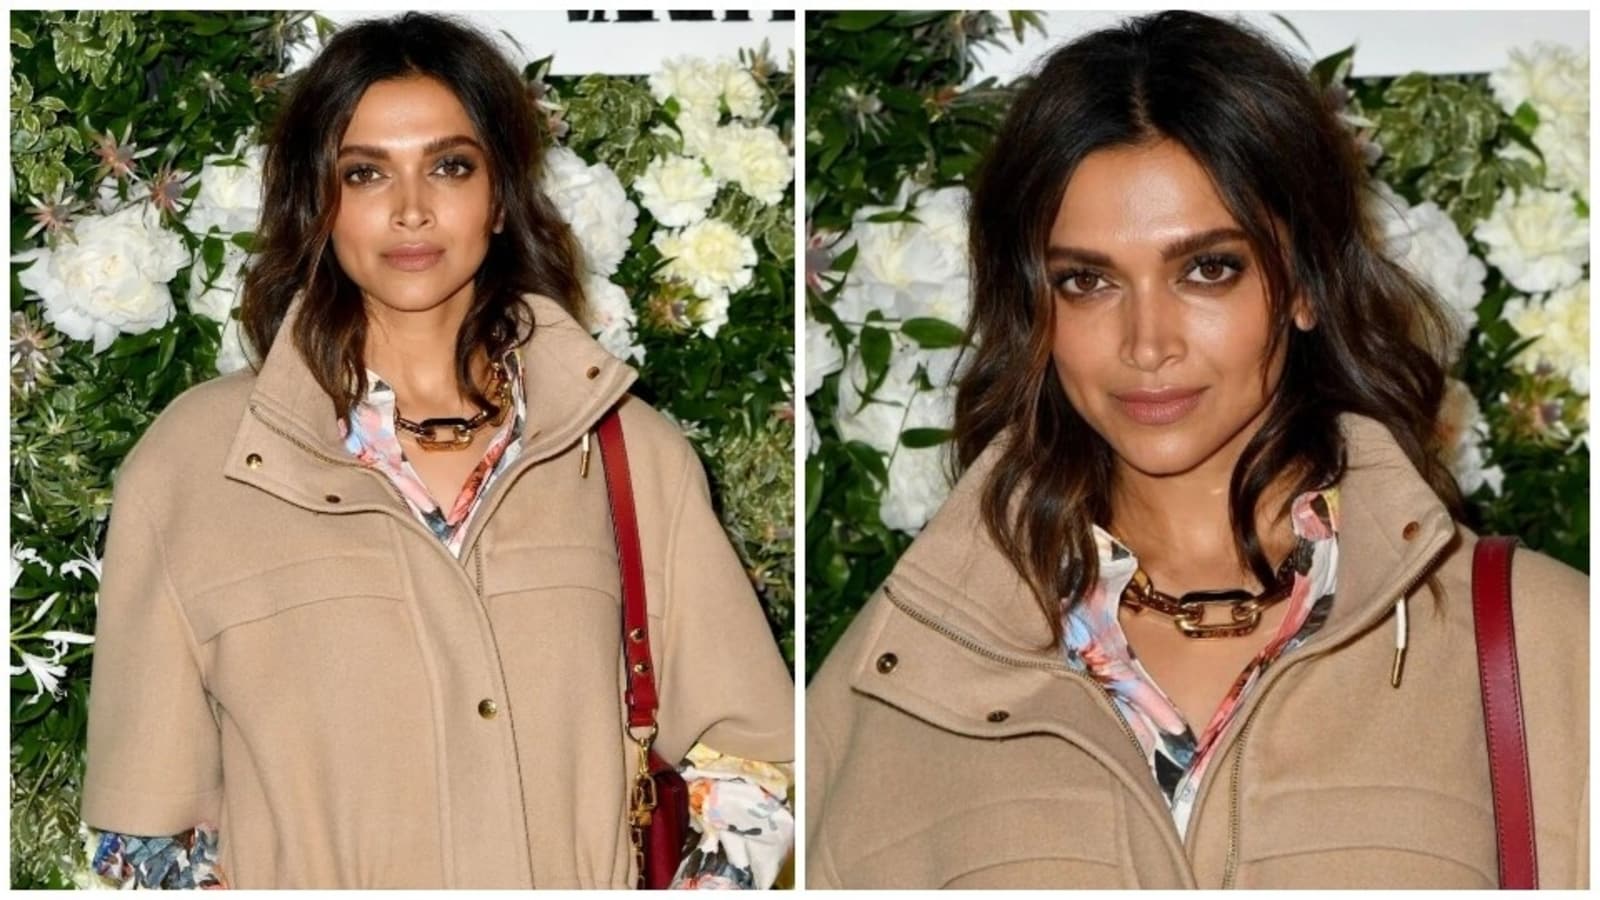 Cannes 2022: Deepika Padukone goes edgy in mini jacket dress for Vanity Fair X Louis Vuitton dinner party, see pics